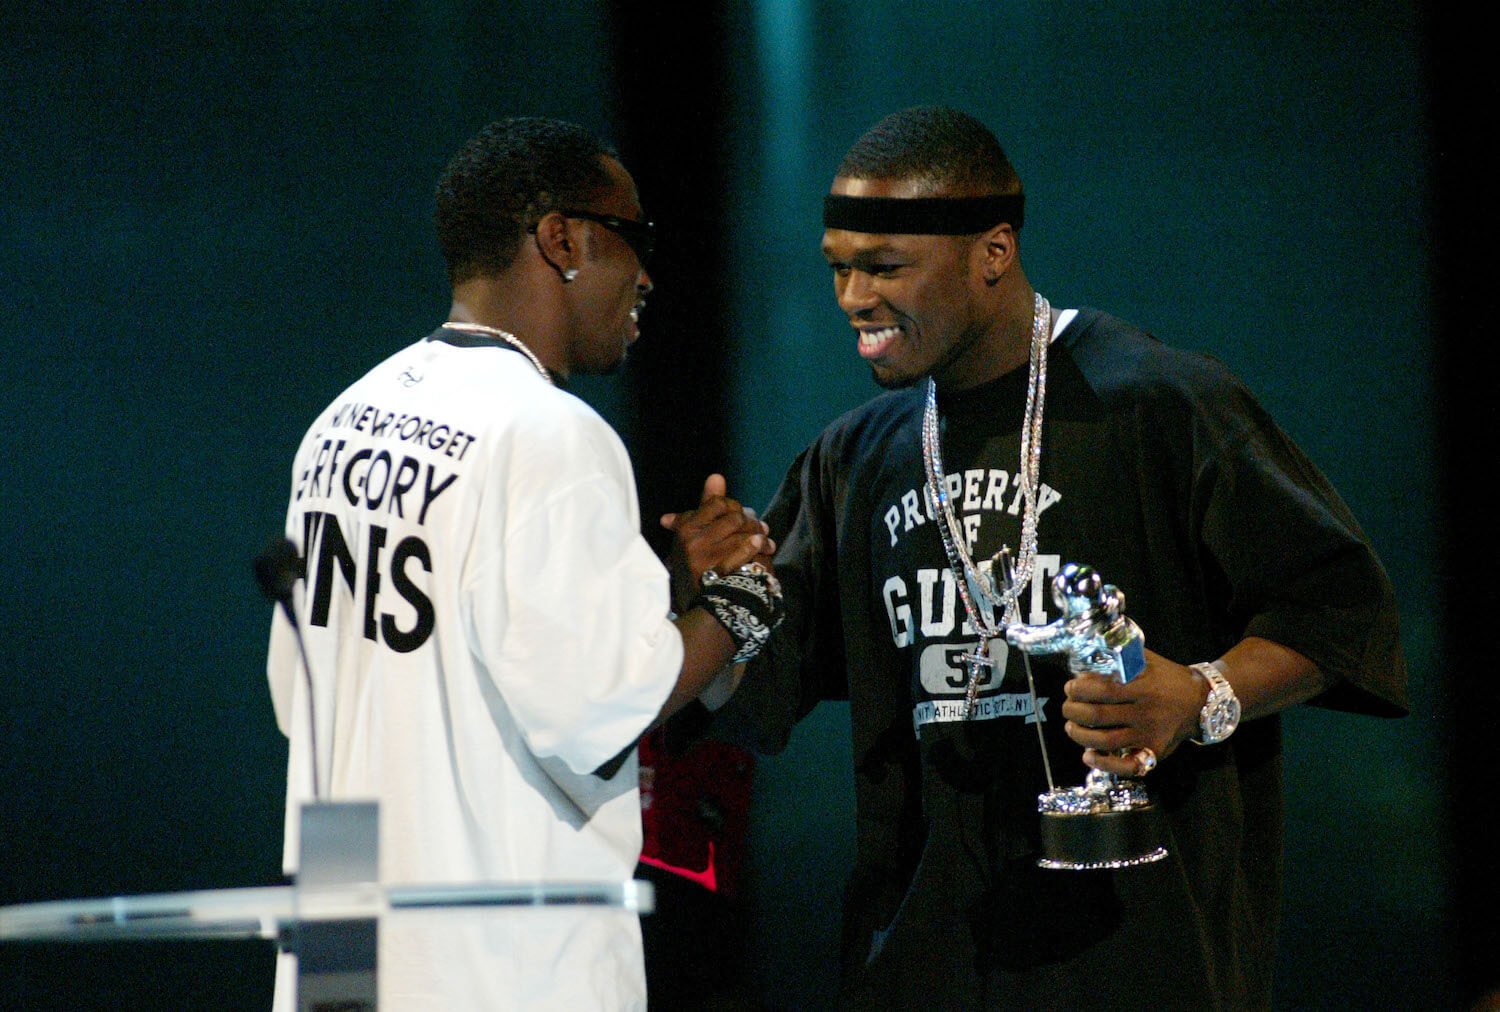 Sean 'P. Diddy' Combs giving an award to 50 Cent